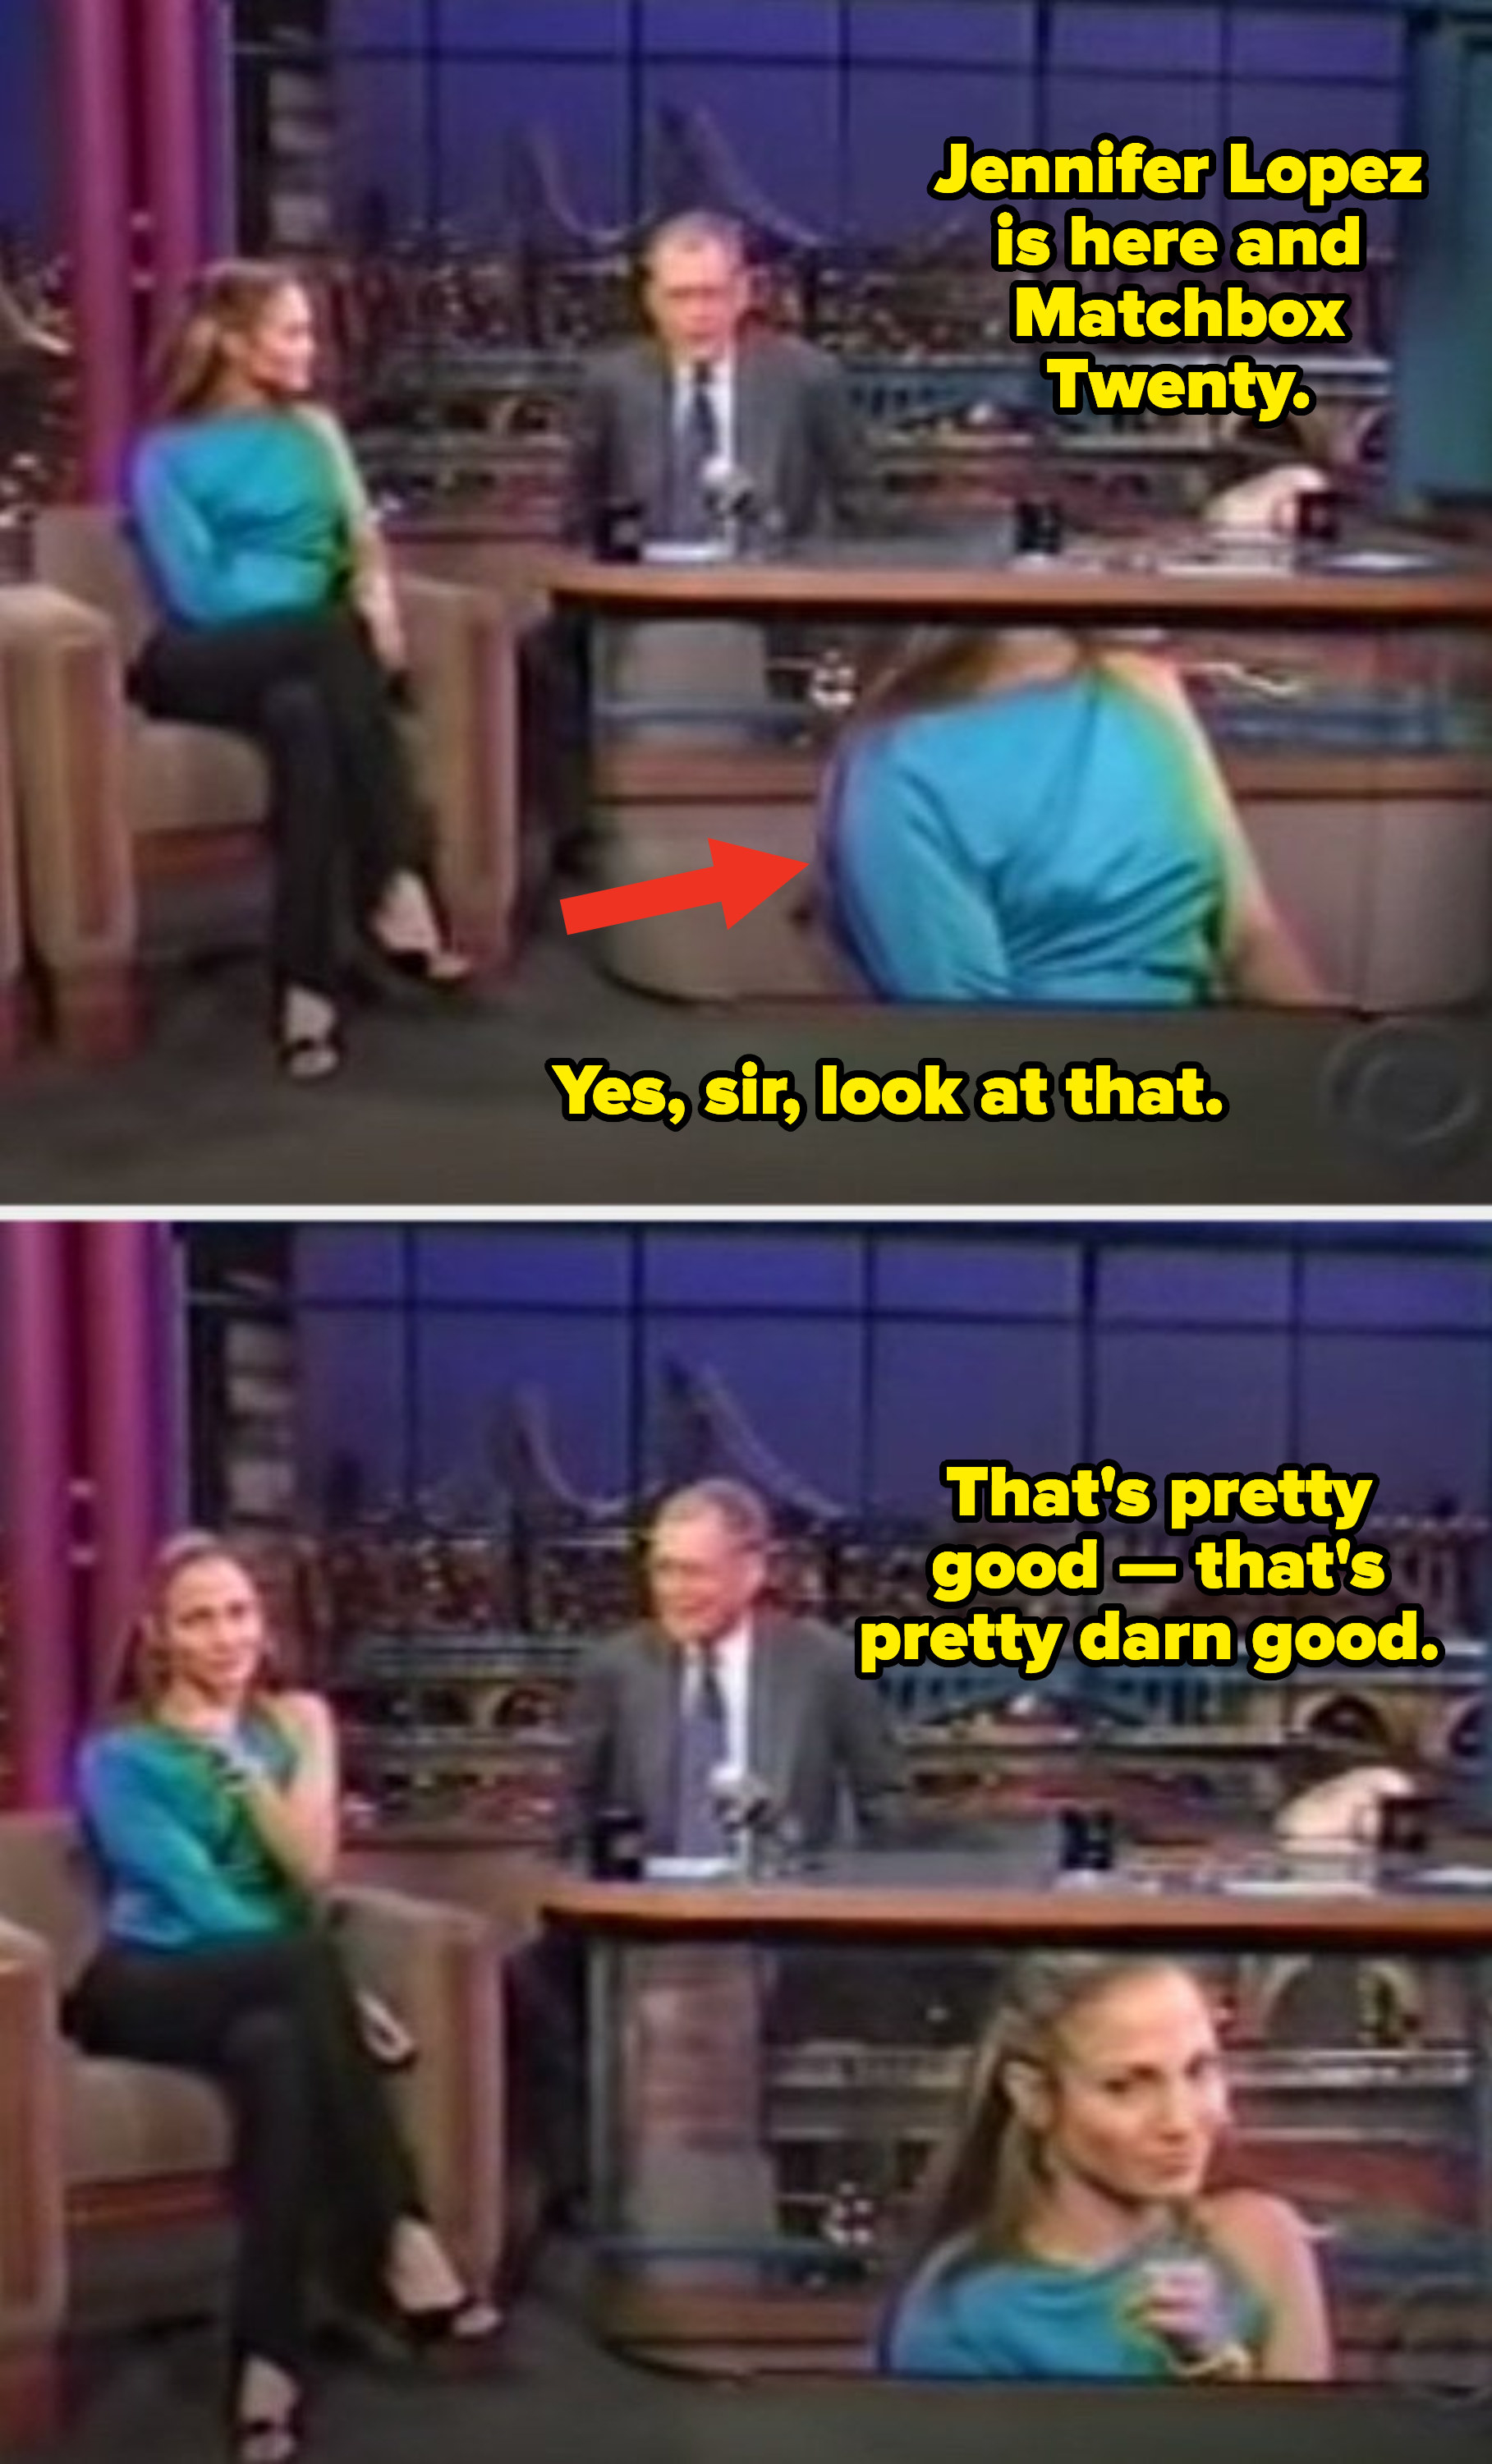 Letterman looking at the green screen underneath his desk of his camera crew zooming in on Lopez&#x27;s breasts, saying: &quot;Yes, sir, look at that. That&#x27;s pretty darn good&quot;